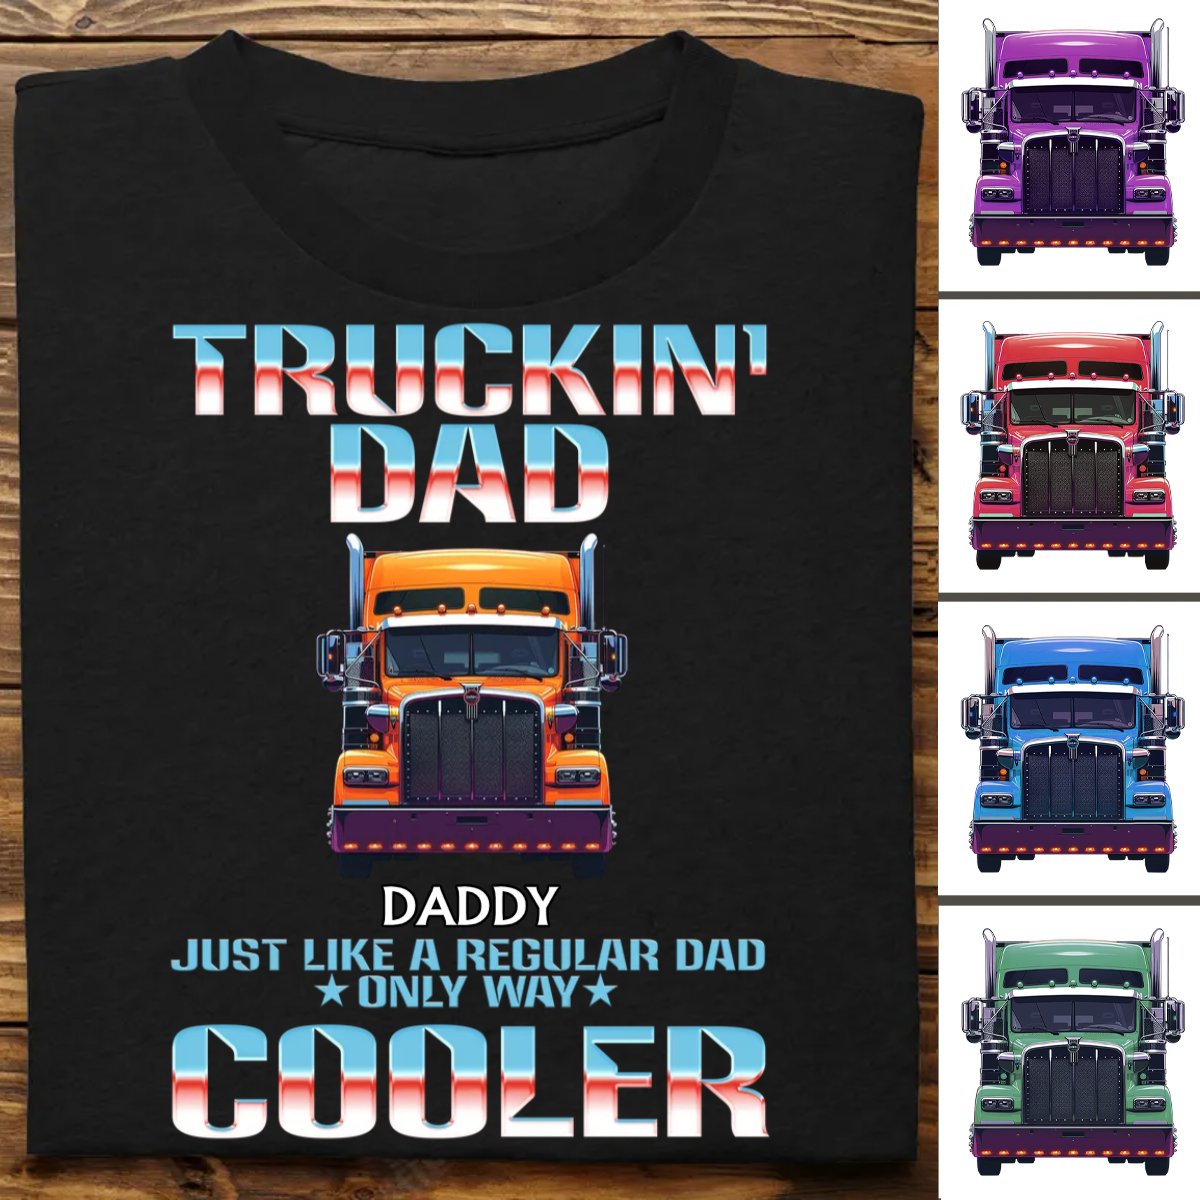 Discover Father - Truckin' Dad, Just Like A Regular Dad, Only Way Cooler - Personalized Unisex T-shirt